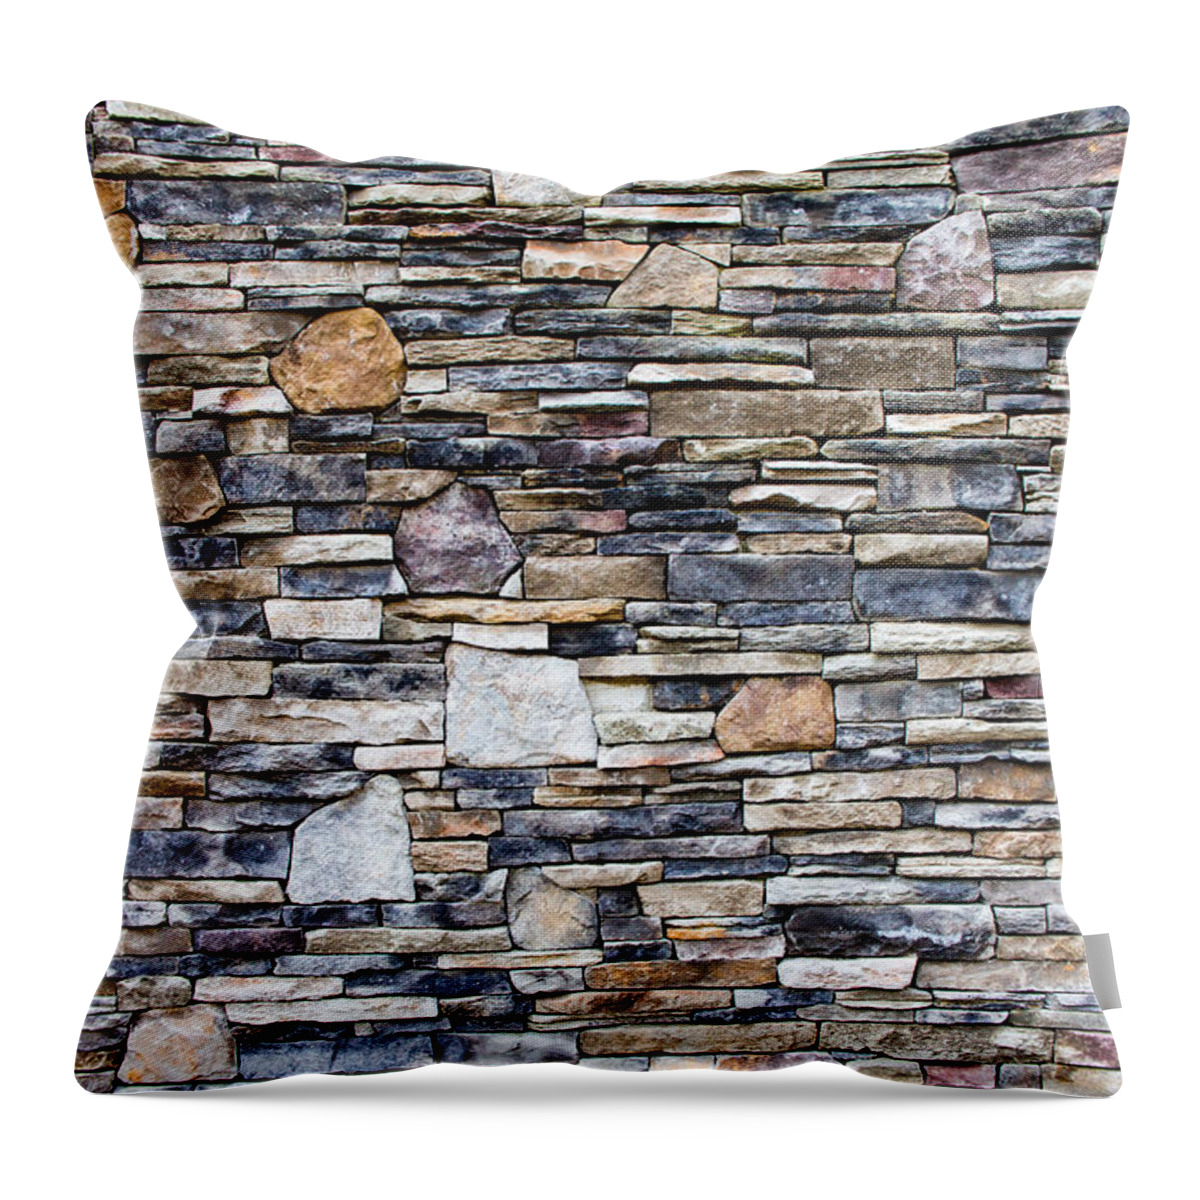 Brick Throw Pillow featuring the photograph Flagstone Wall by SR Green